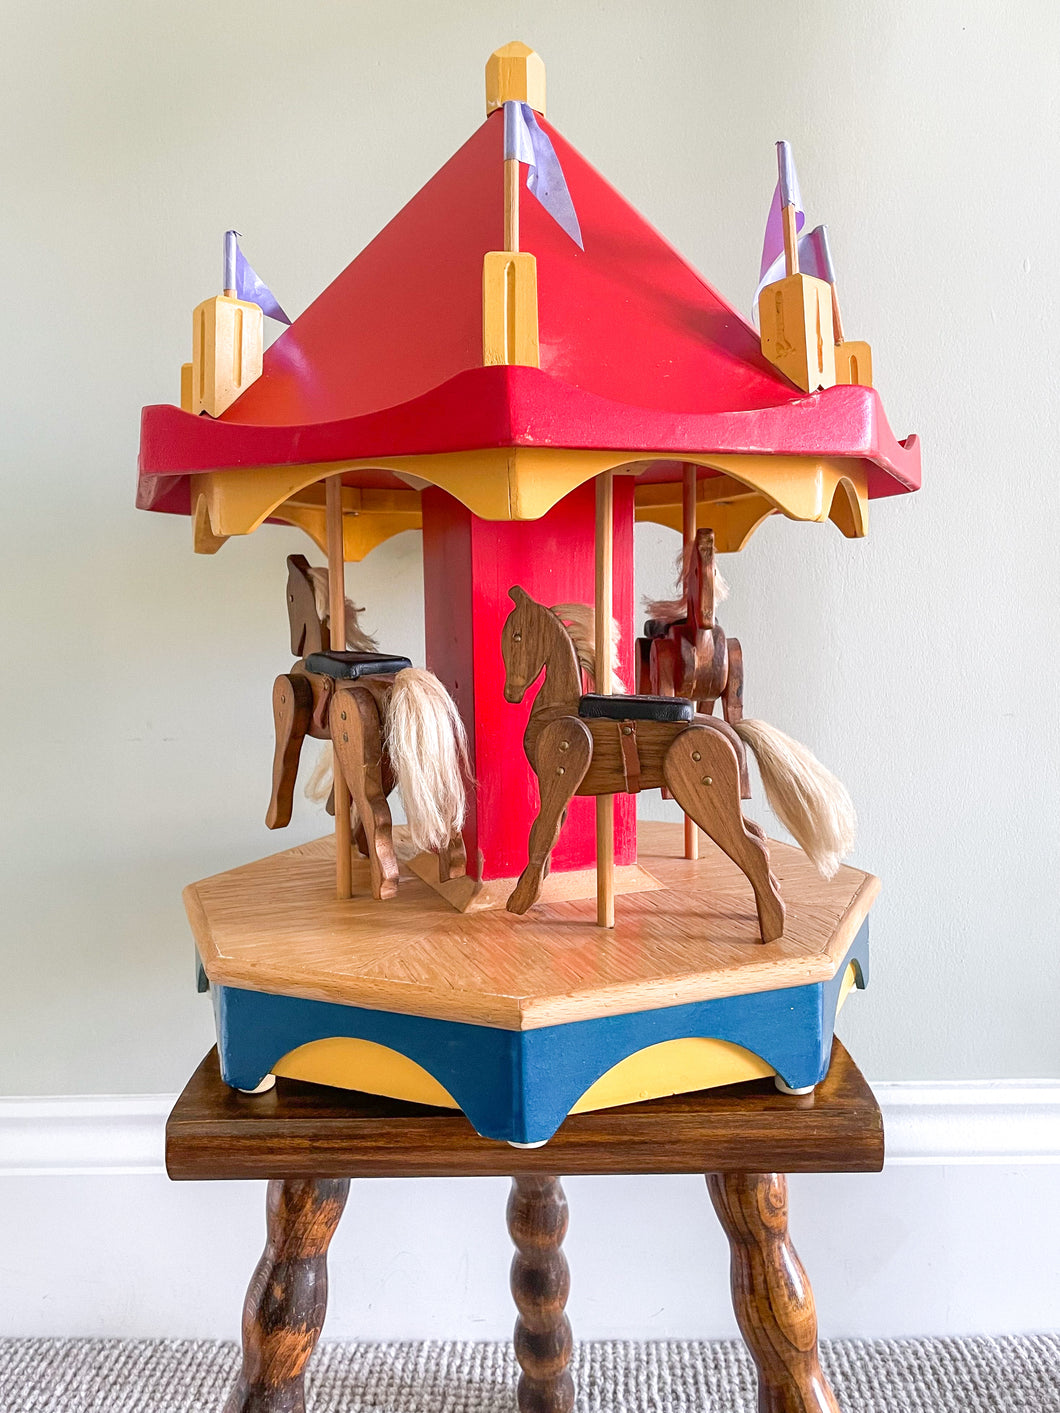 Vintage handmade wooden Swedish carousel or merry-go-round - Moppet